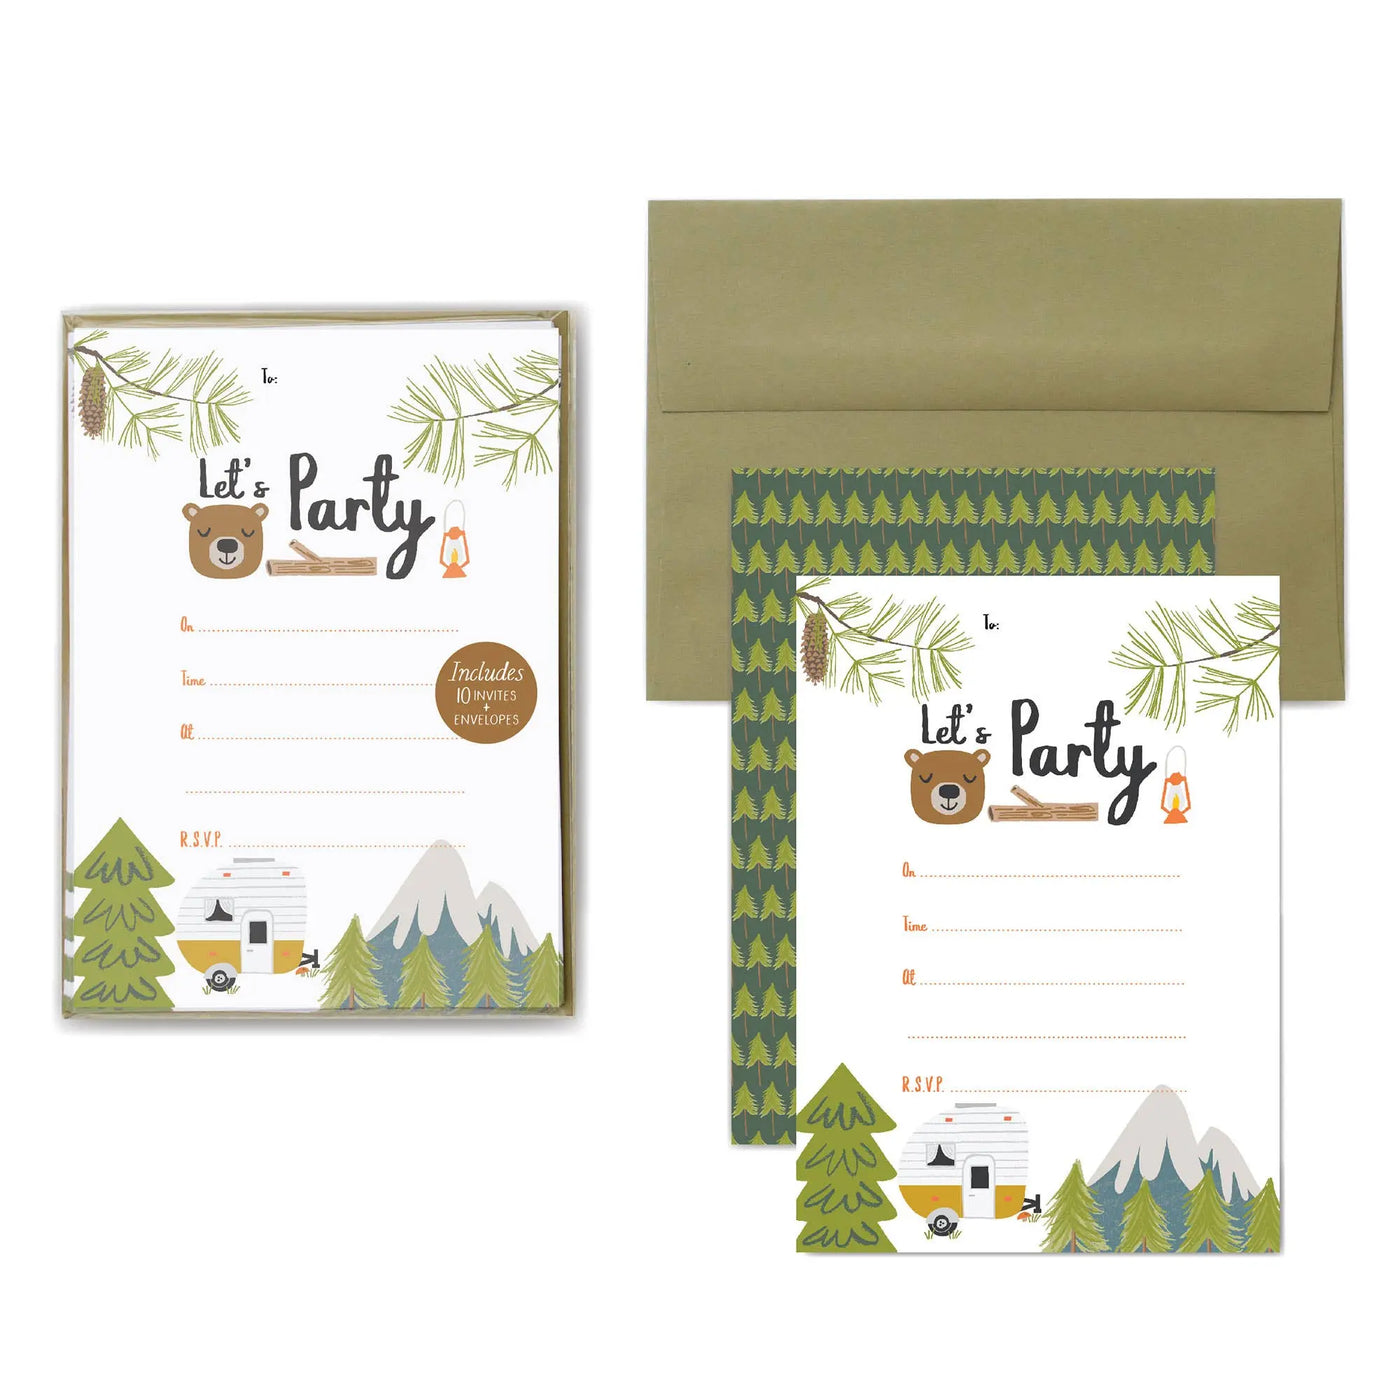 Little Camper - Party Invitations Lucy Darling